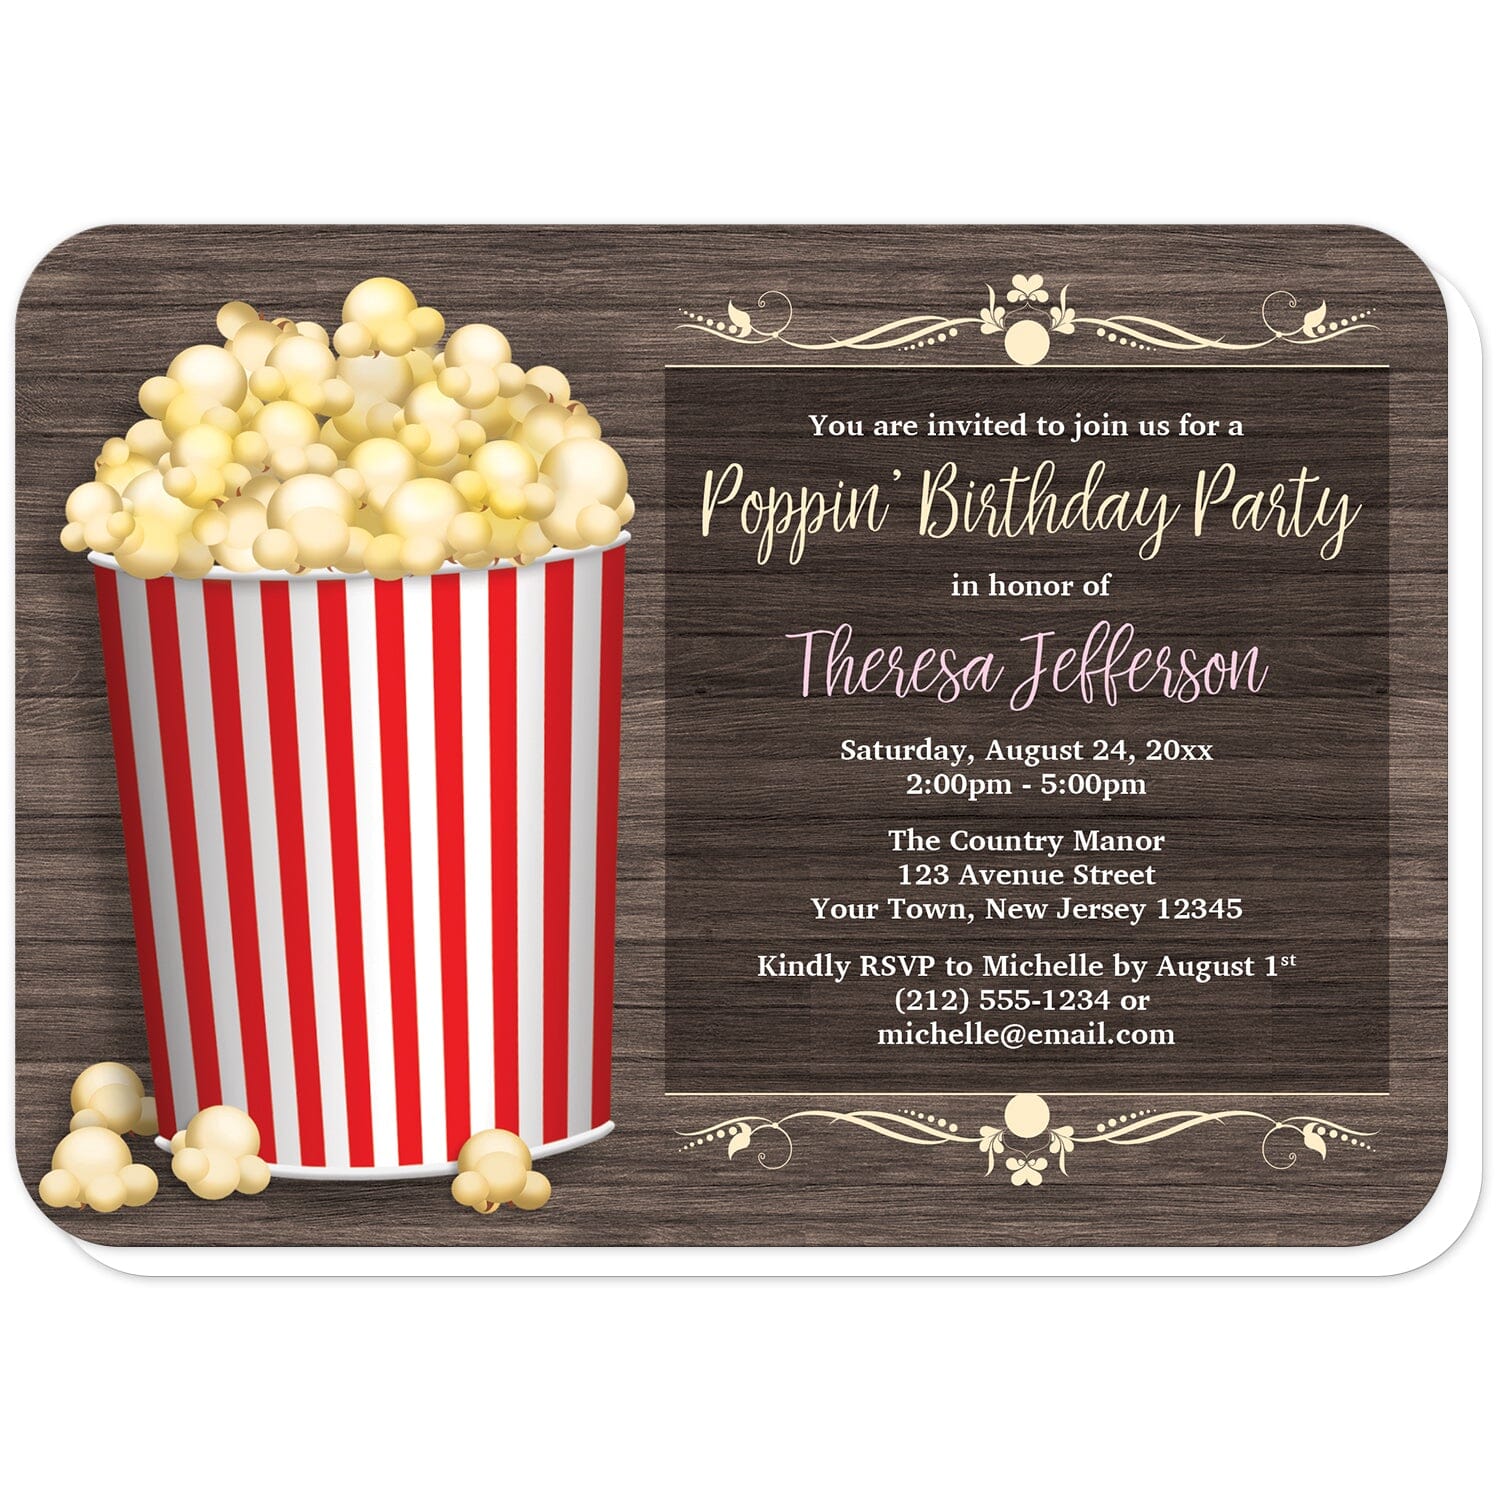 Popcorn Bucket Rustic Wood Birthday Party Invitations (with rounded corners) at Artistically Invited. Popcorn bucket rustic wood birthday party invitations for age or milestone that are uniquely illustrated with a red stripe popcorn bucket filled to the top and overflowing. Your personalized birthday party details are custom printed in yellow, pink (the pink can be changed upon request), and white over a darkened movie screen-like area to the right of the bucket. The background is a rustic wood pattern. 